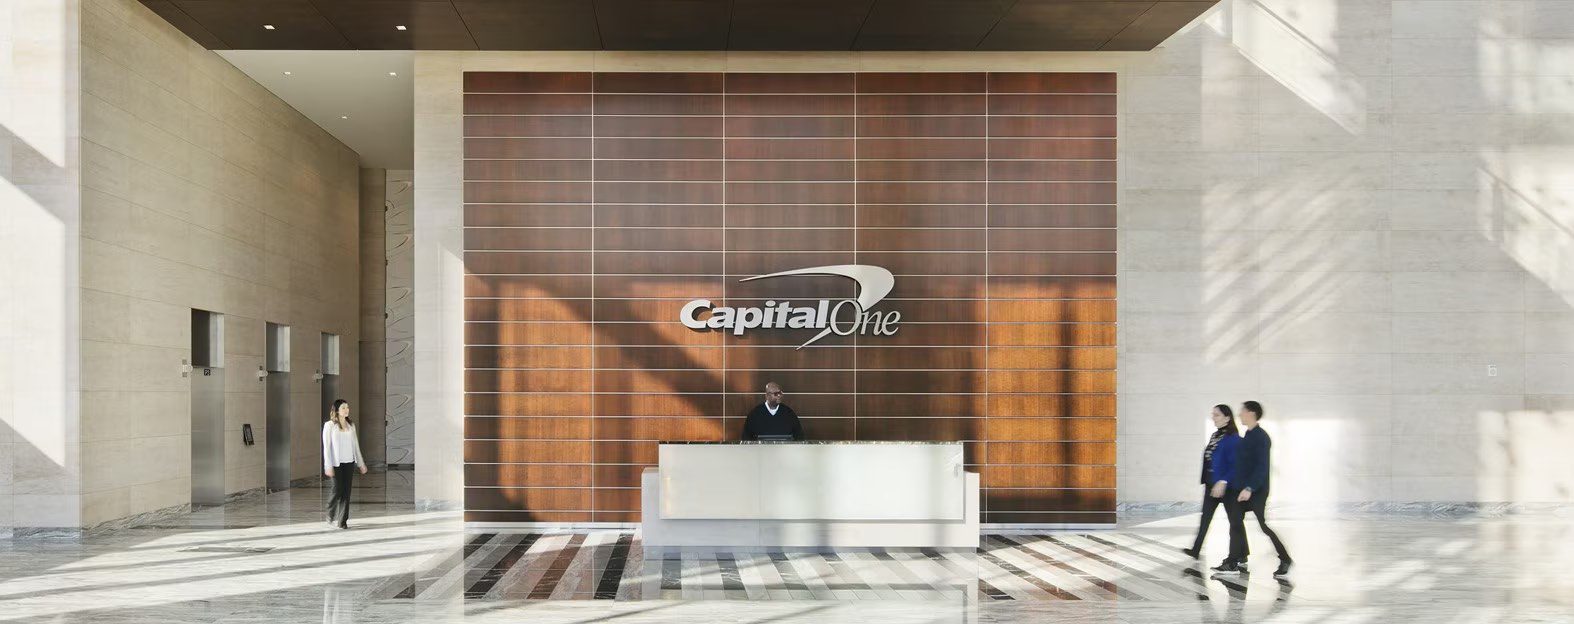 Capital One Announces $35.3bn Acquisition of Discover Financial Services